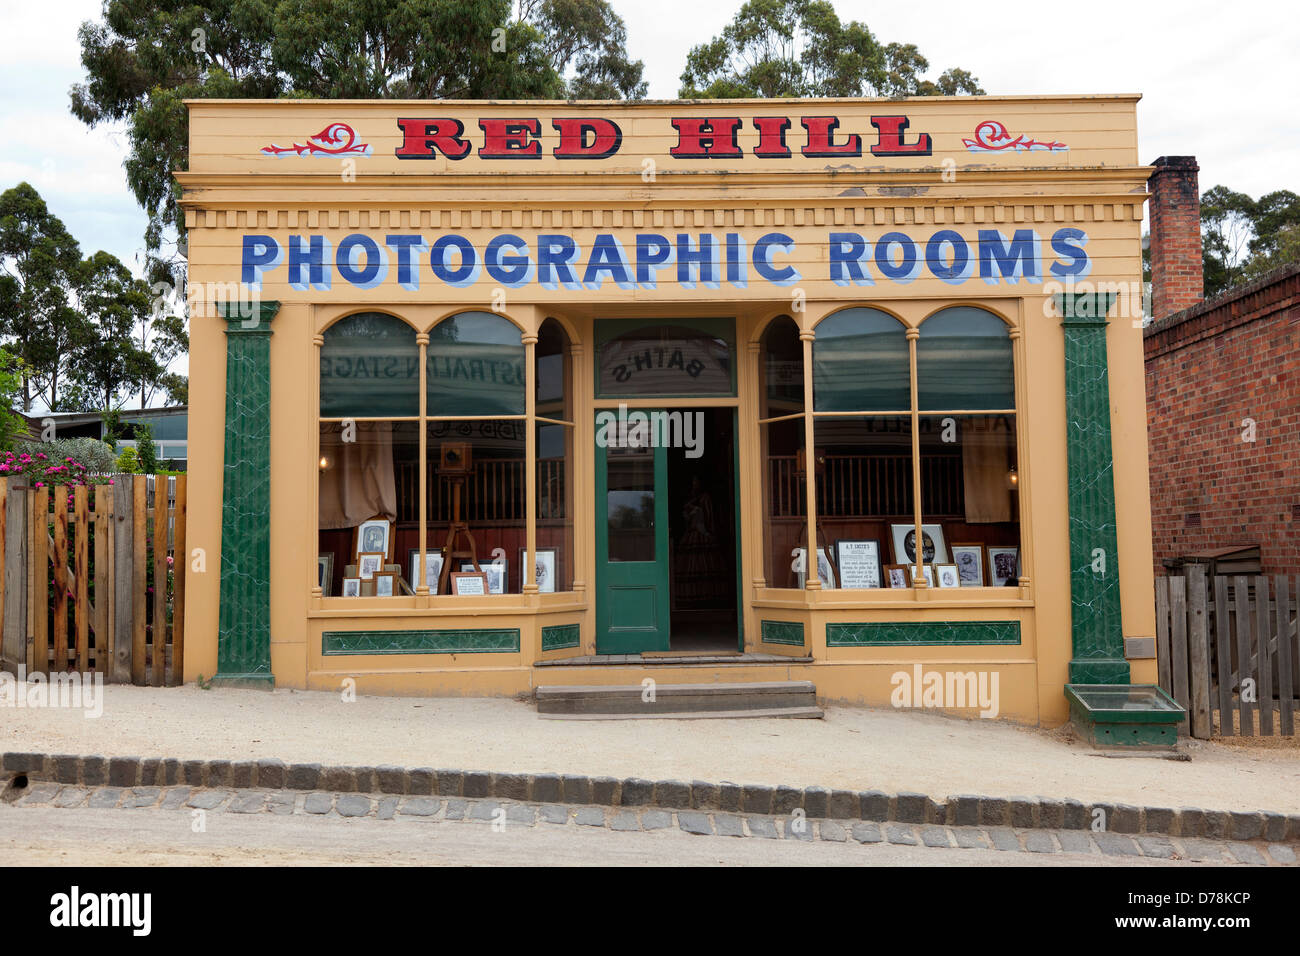 Photographic rooms in Sovereign Hill's former gold mining site in Ballarat, Australia Stock Photo